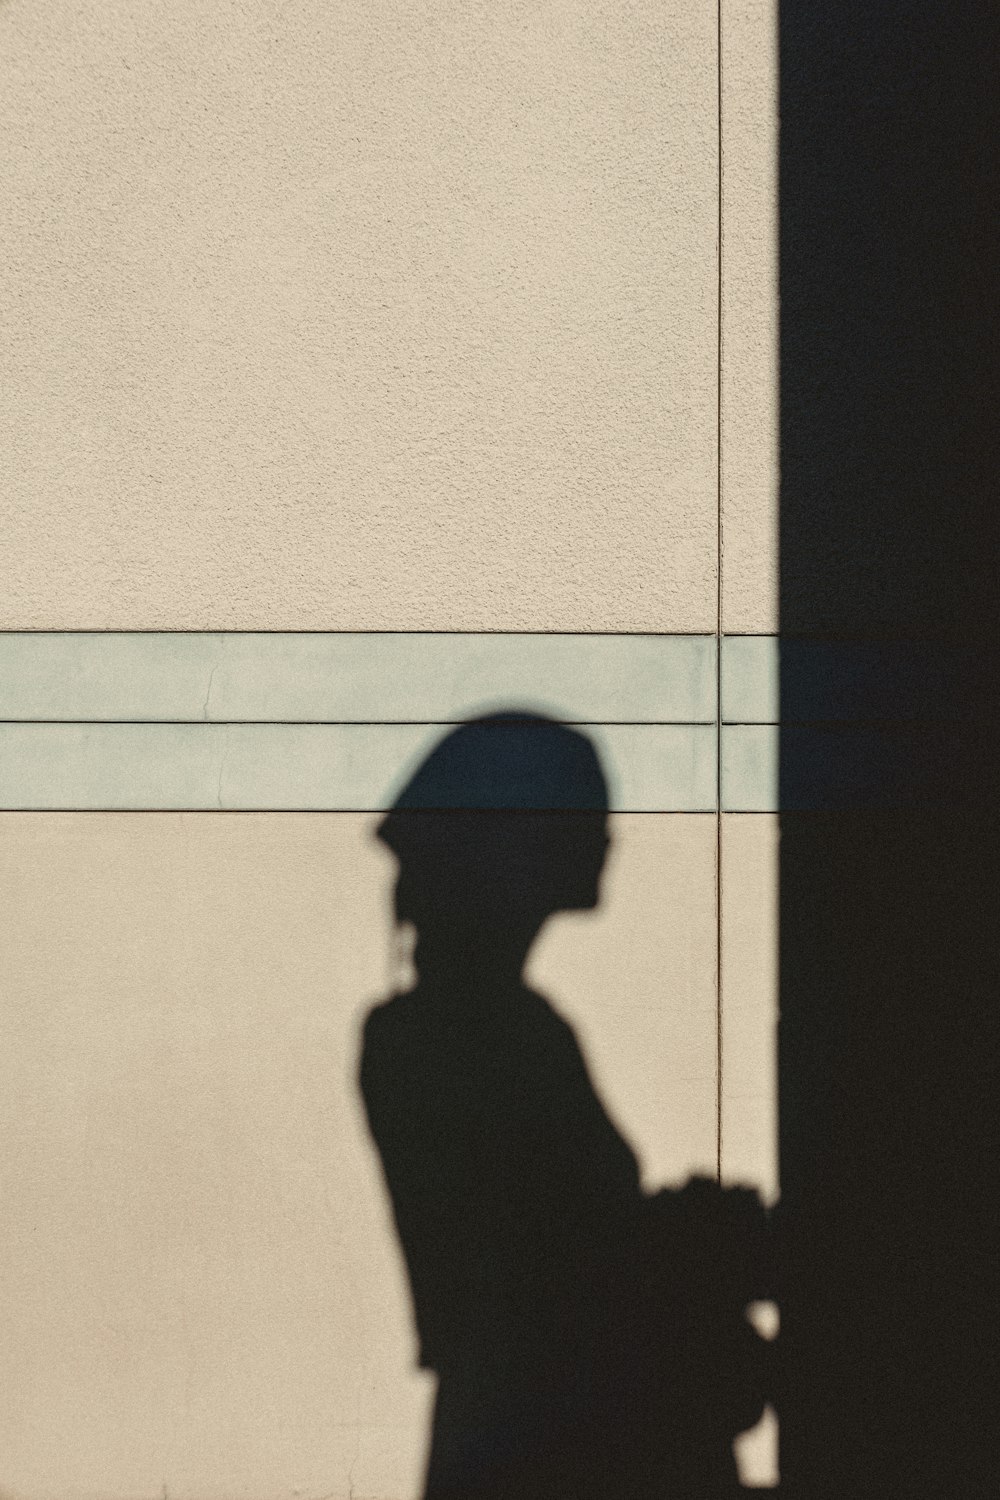 a shadow of a person standing next to a building